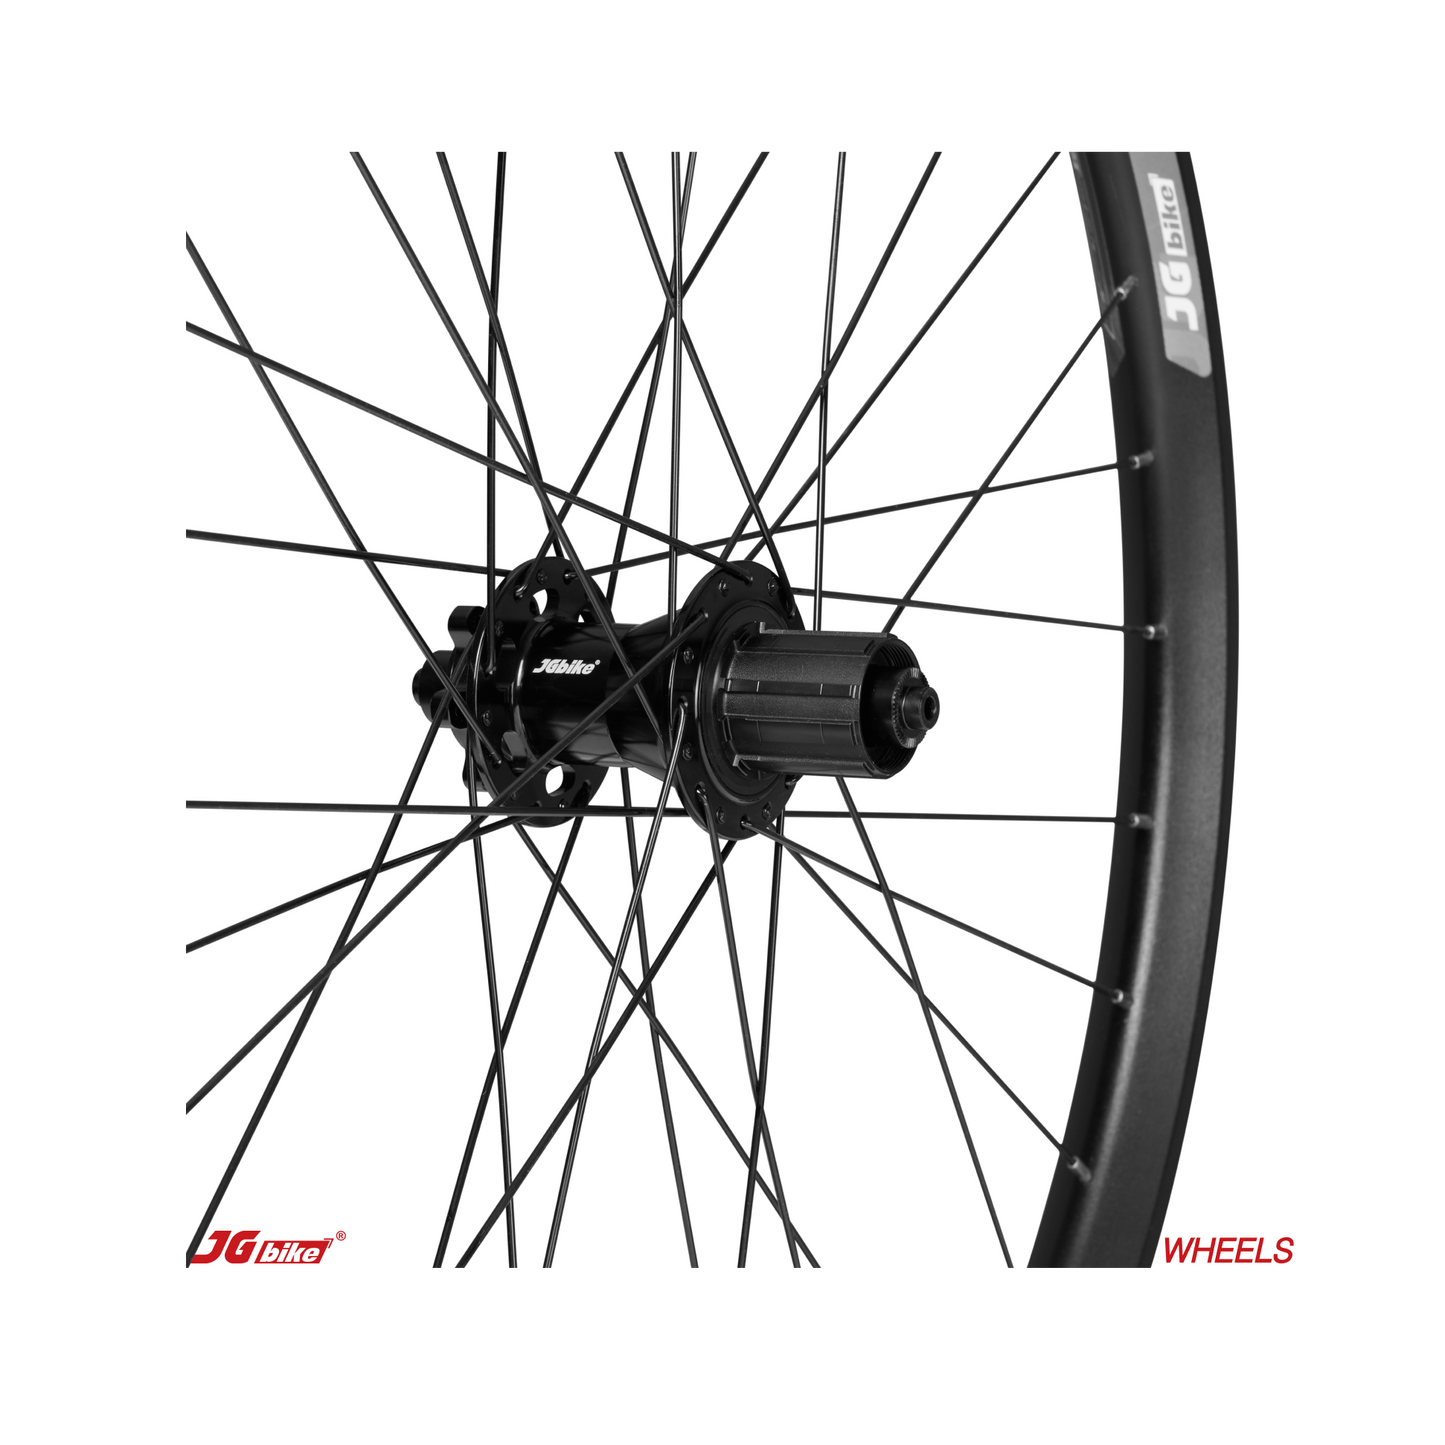 JGbike Mountain Bike Wheelset M30 26" 27.5" 29" tubeless Ready with 57T 6 pawls 114points 32H hubs, Double Wall Alloy 6-Bolts Disc Brake Mount for Shimano SRAM Driver